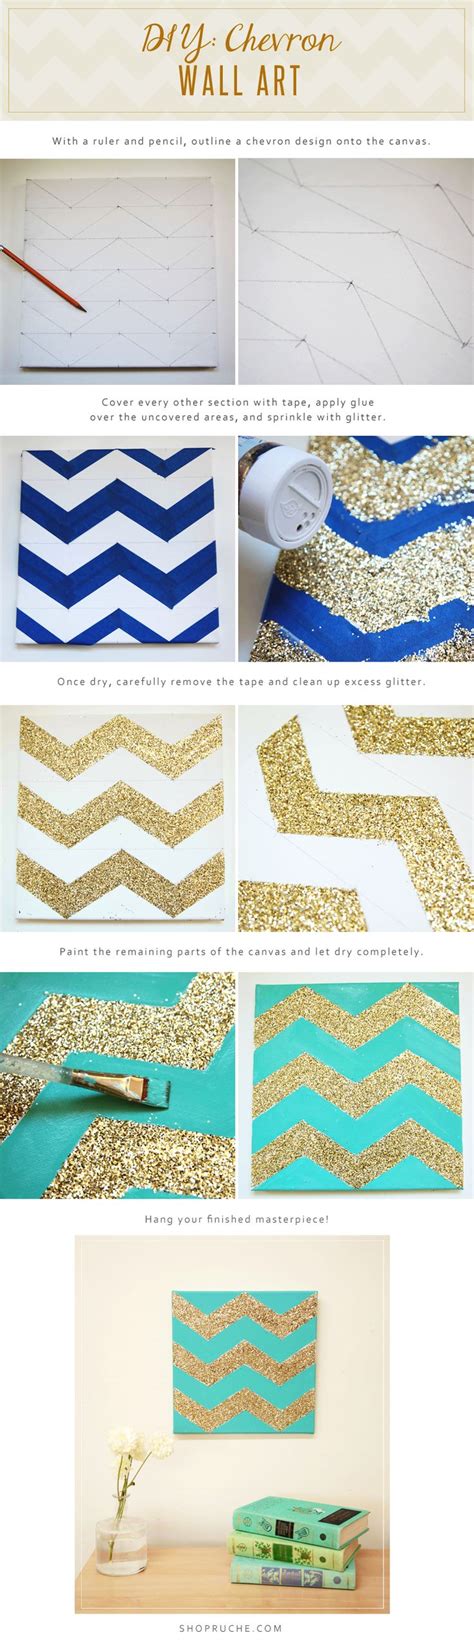 31 Diy Paintings To Enhance Your Interior And Decorate